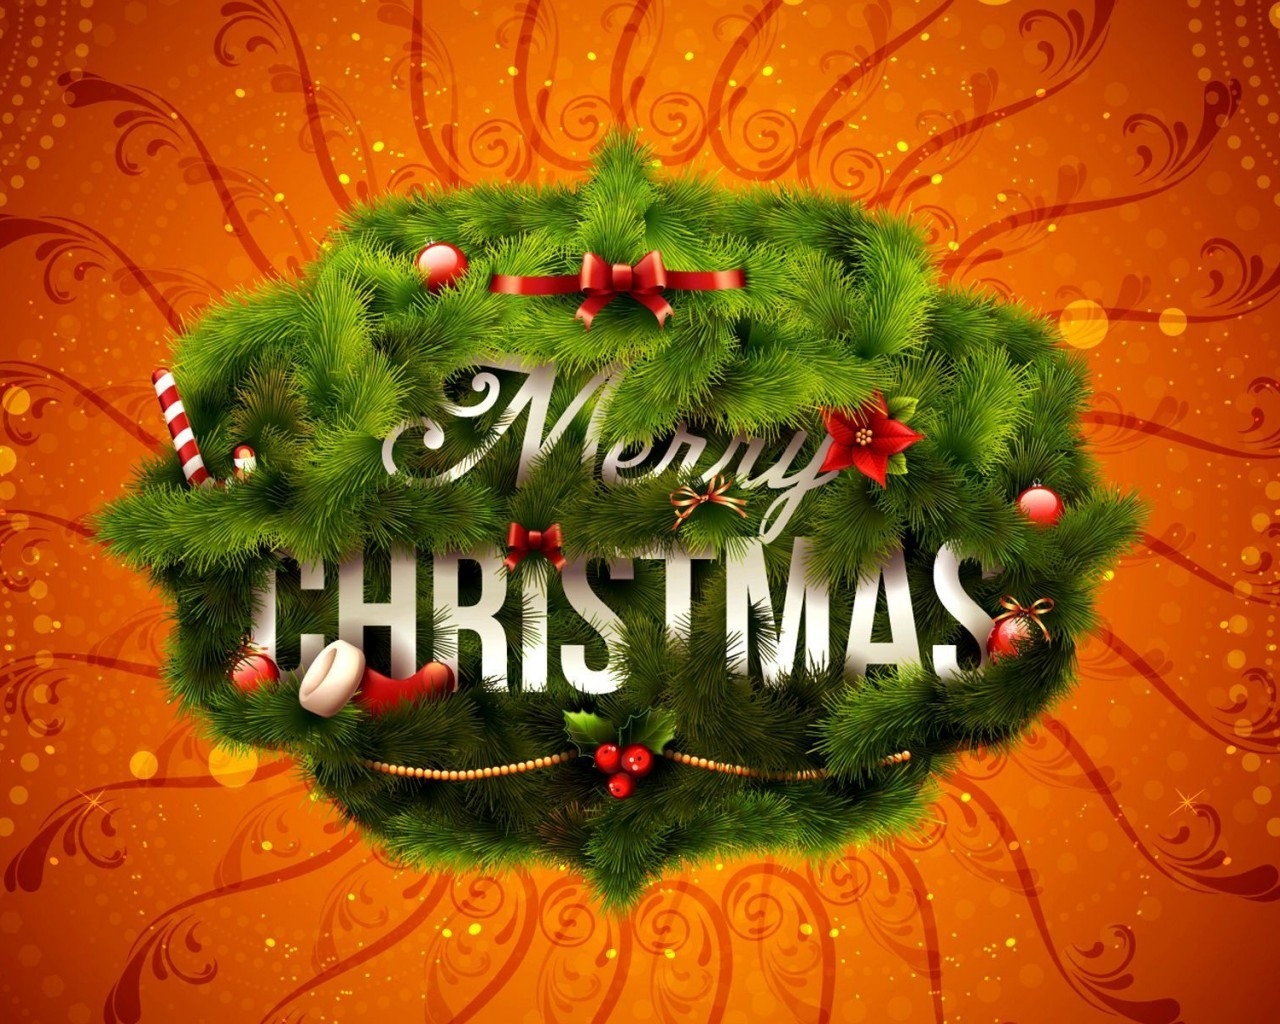 Merry Christmas Wreath for 1280 x 1024 resolution